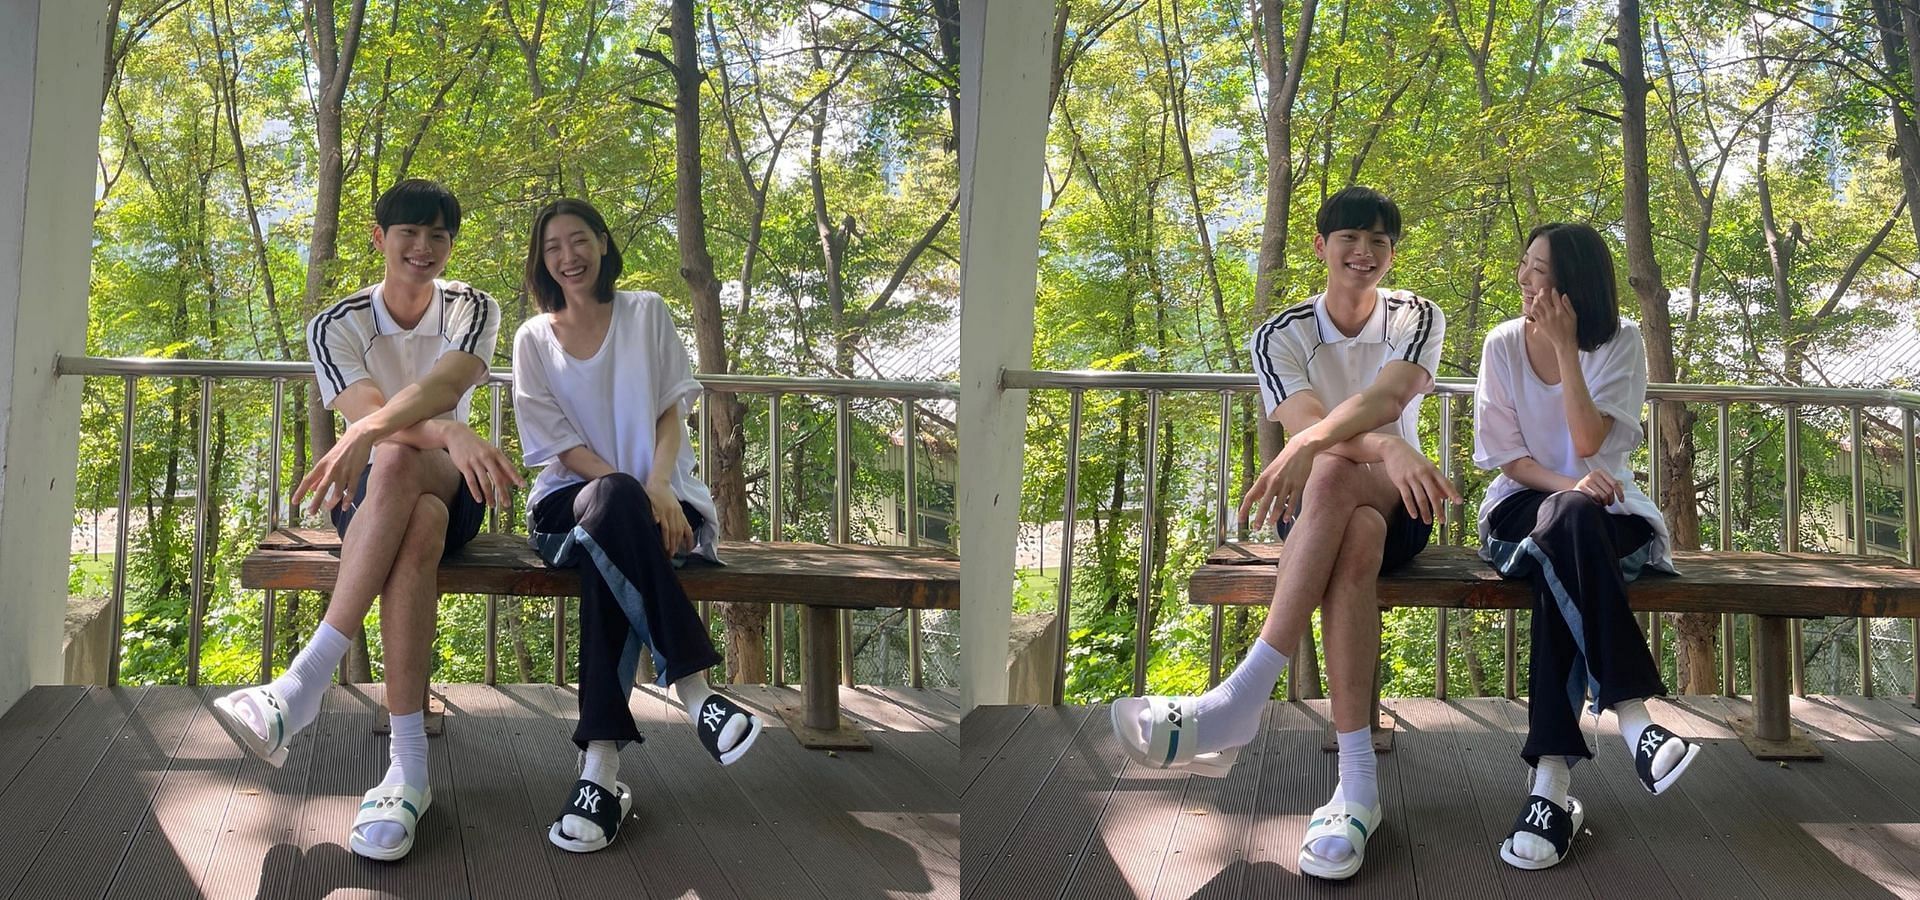 Lee Chae-min and Ryu Da-in confirmed to be dating (Images Via Instagram/@l.c.m____) 